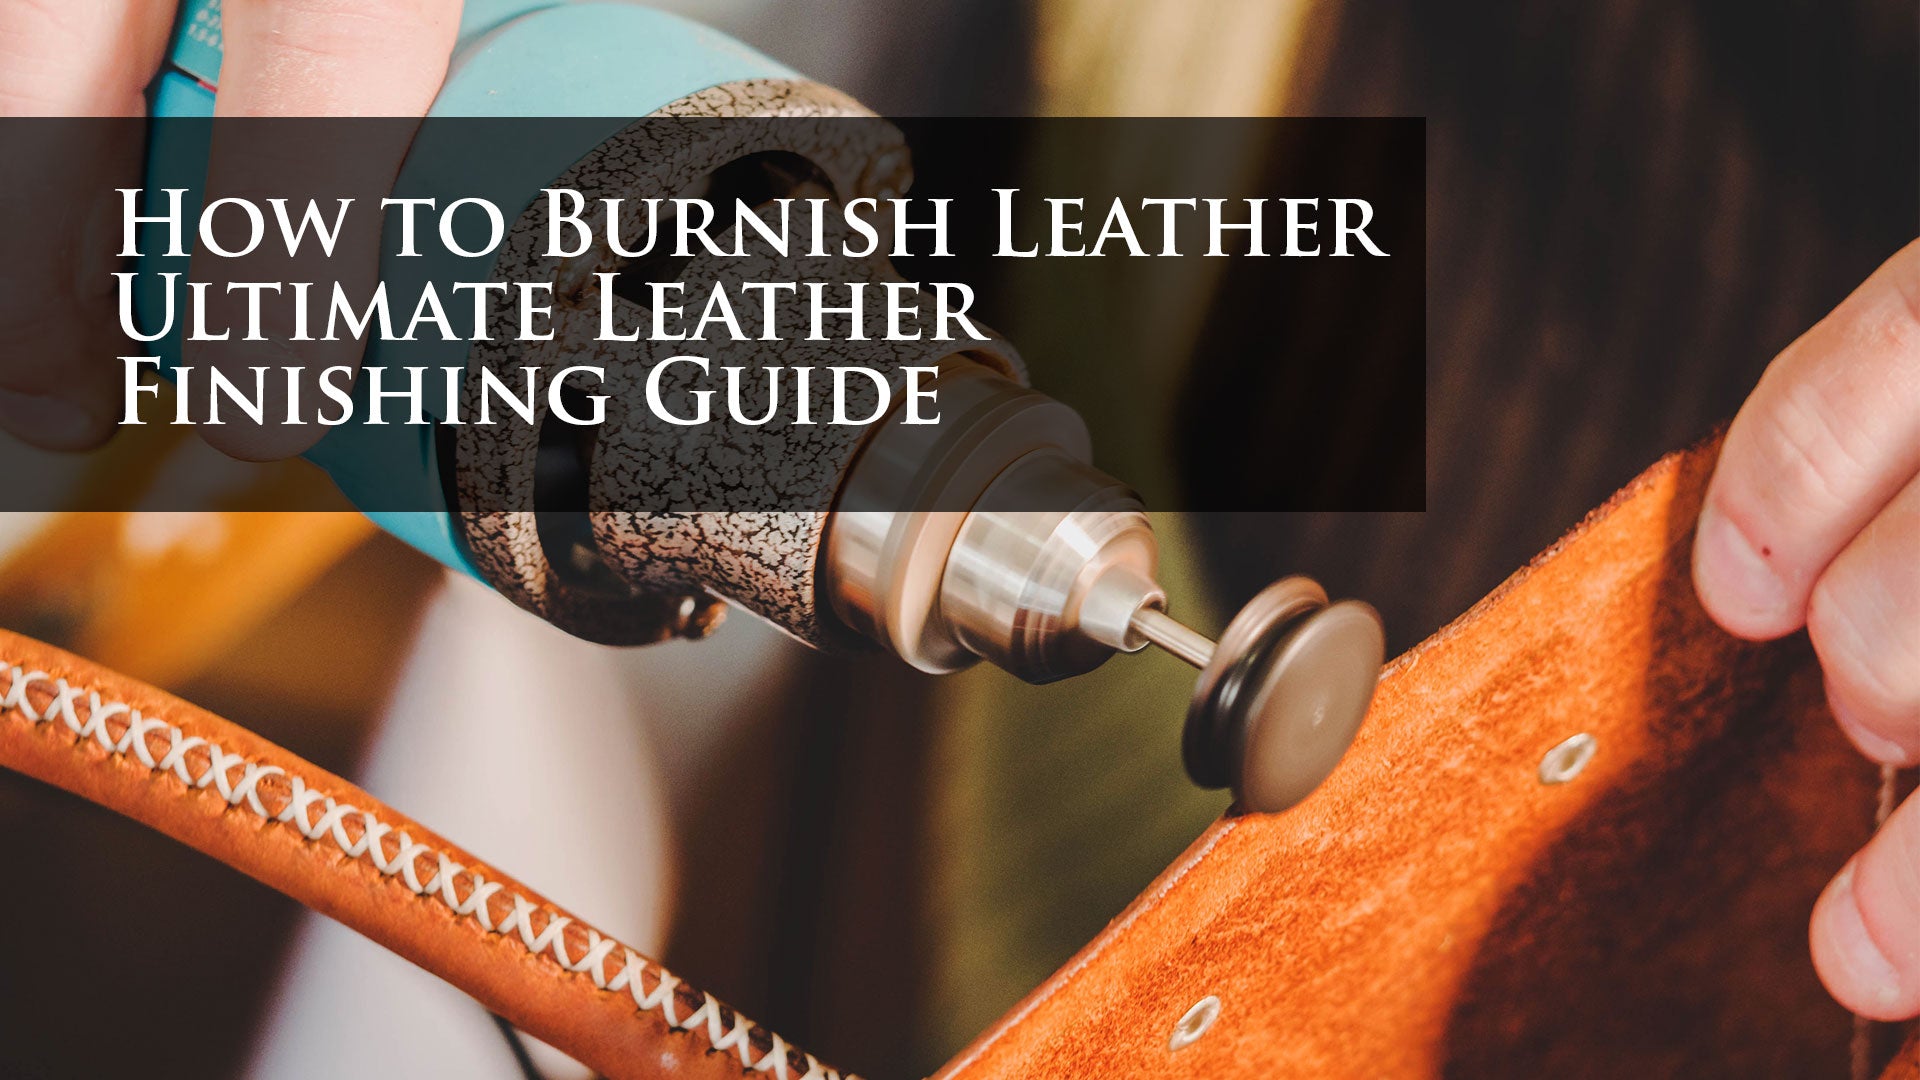 How to Burnish Leather, Ultimate Leather Finishing Guide – Von Baer